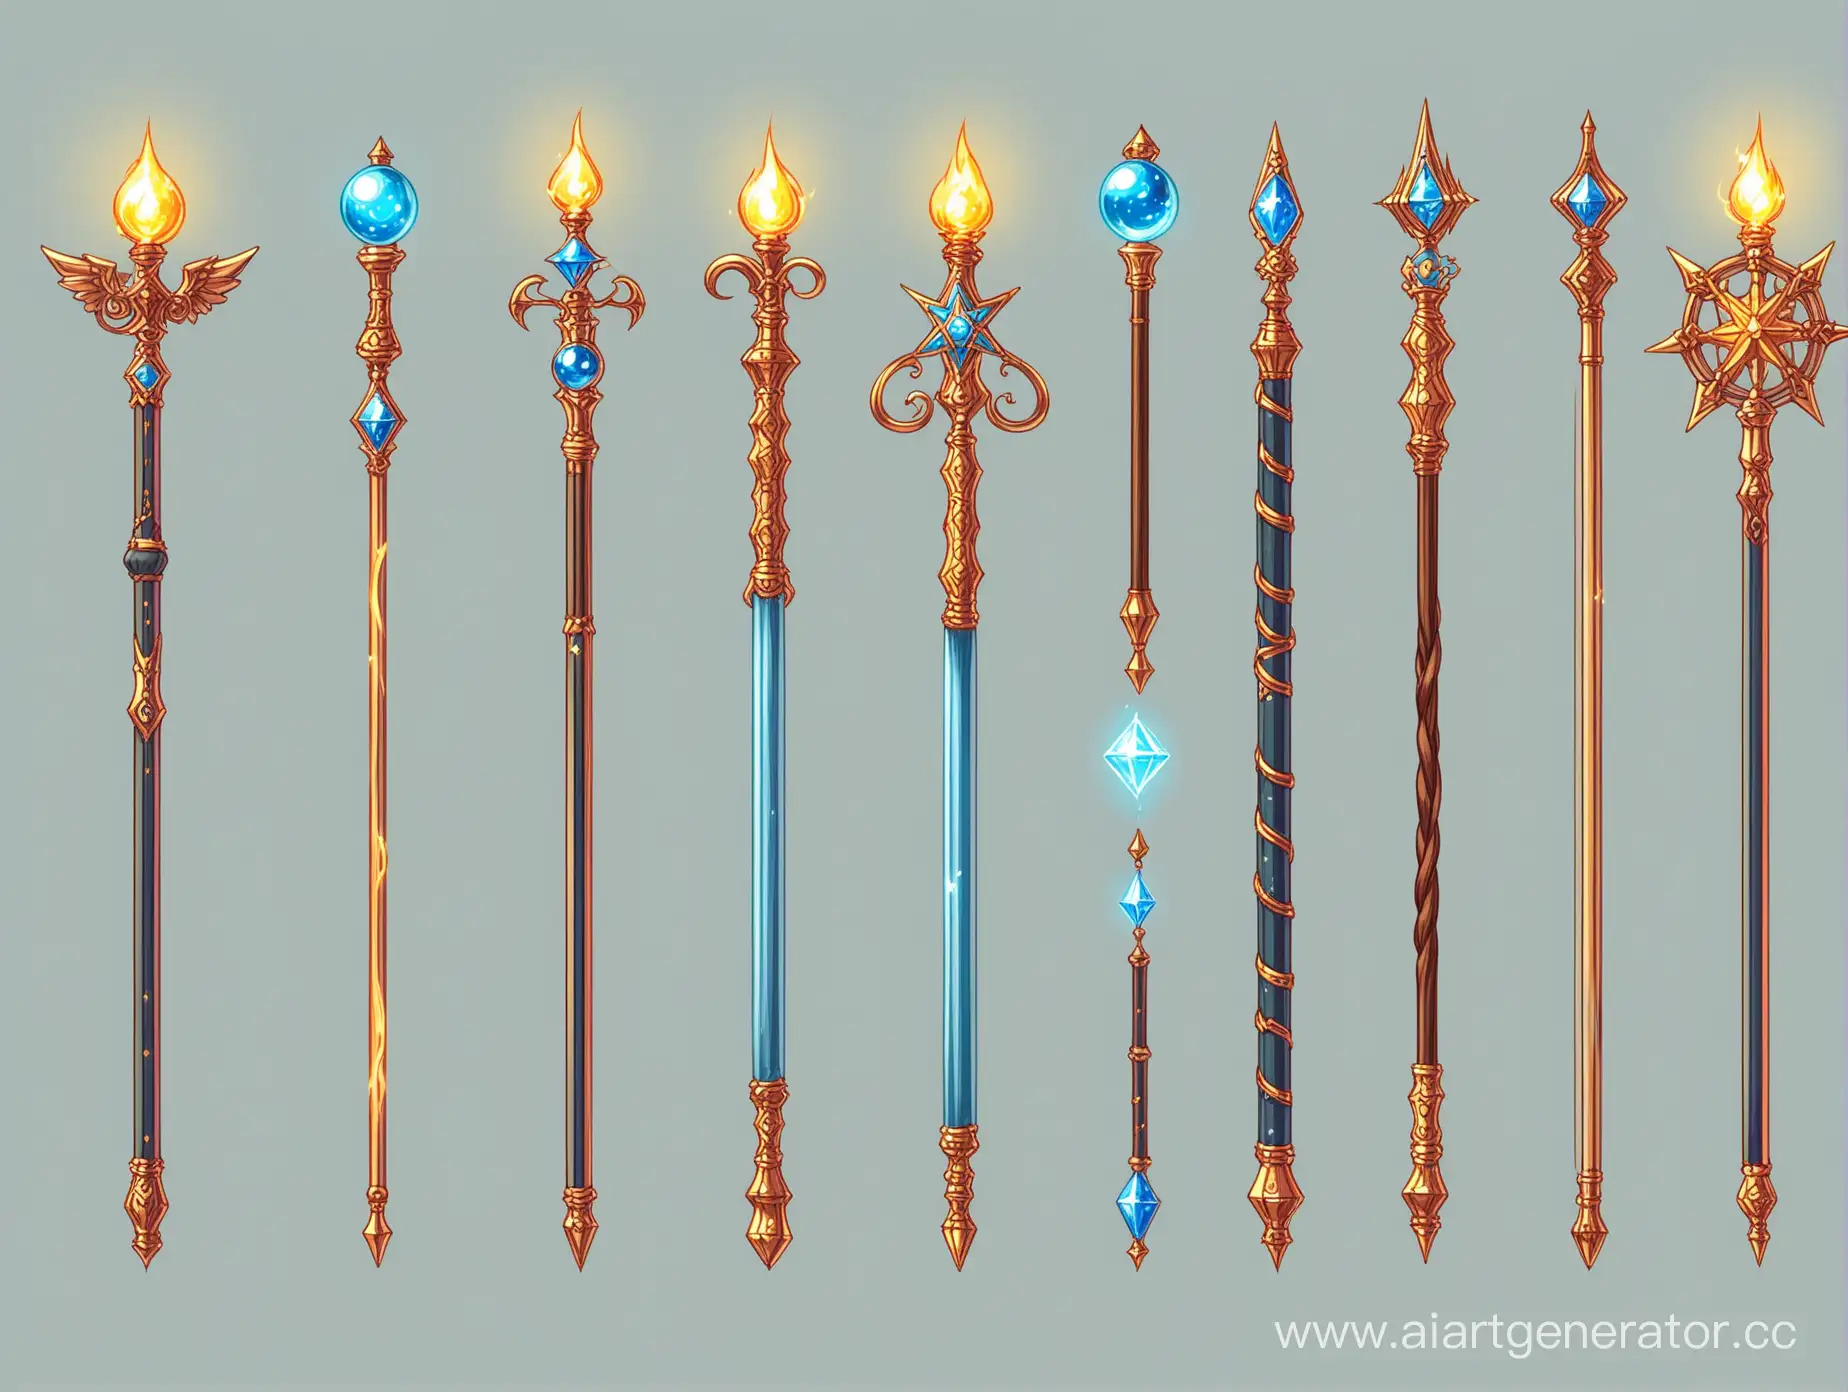 Variety-of-Magical-Staffs-Elemental-Wands-Collection-for-Fantasy-Art